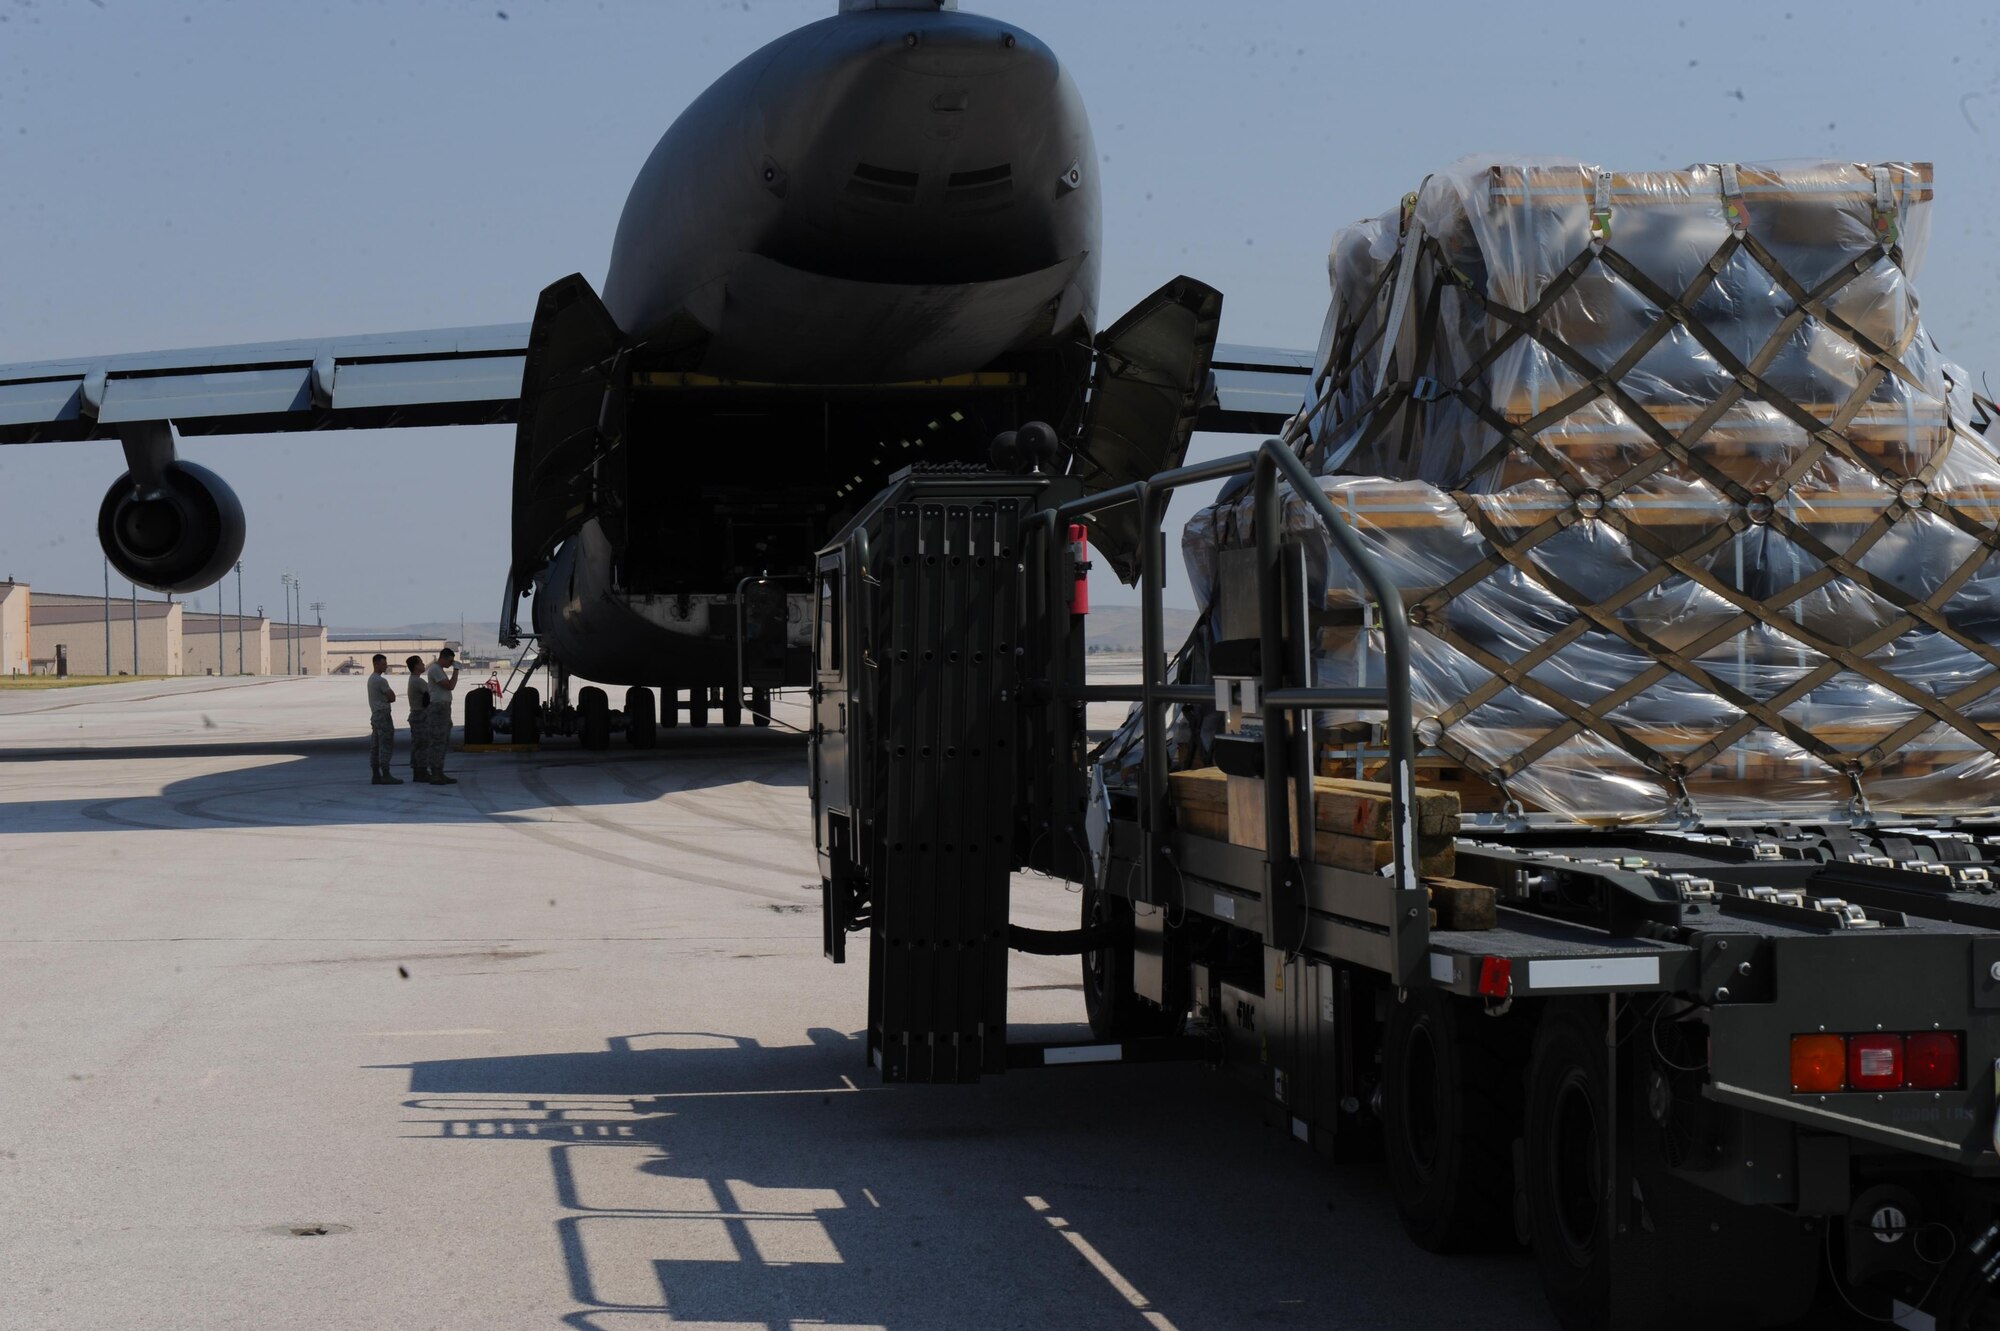 Airmen assigned to the 22nd Airlift Squadron, Travis Air Force Base, Calif., load cargo onto a C-5M Super Galaxy at Ellsworth Air Force Base, S.D., July 22, 2017. More than 350 Airmen deployed to Andersen Air Force Base, Guam, in support of the Continuous Bomber Presence mission in the Pacific. (U.S. Air Force photo by Airman Nicolas Z. Erwin)